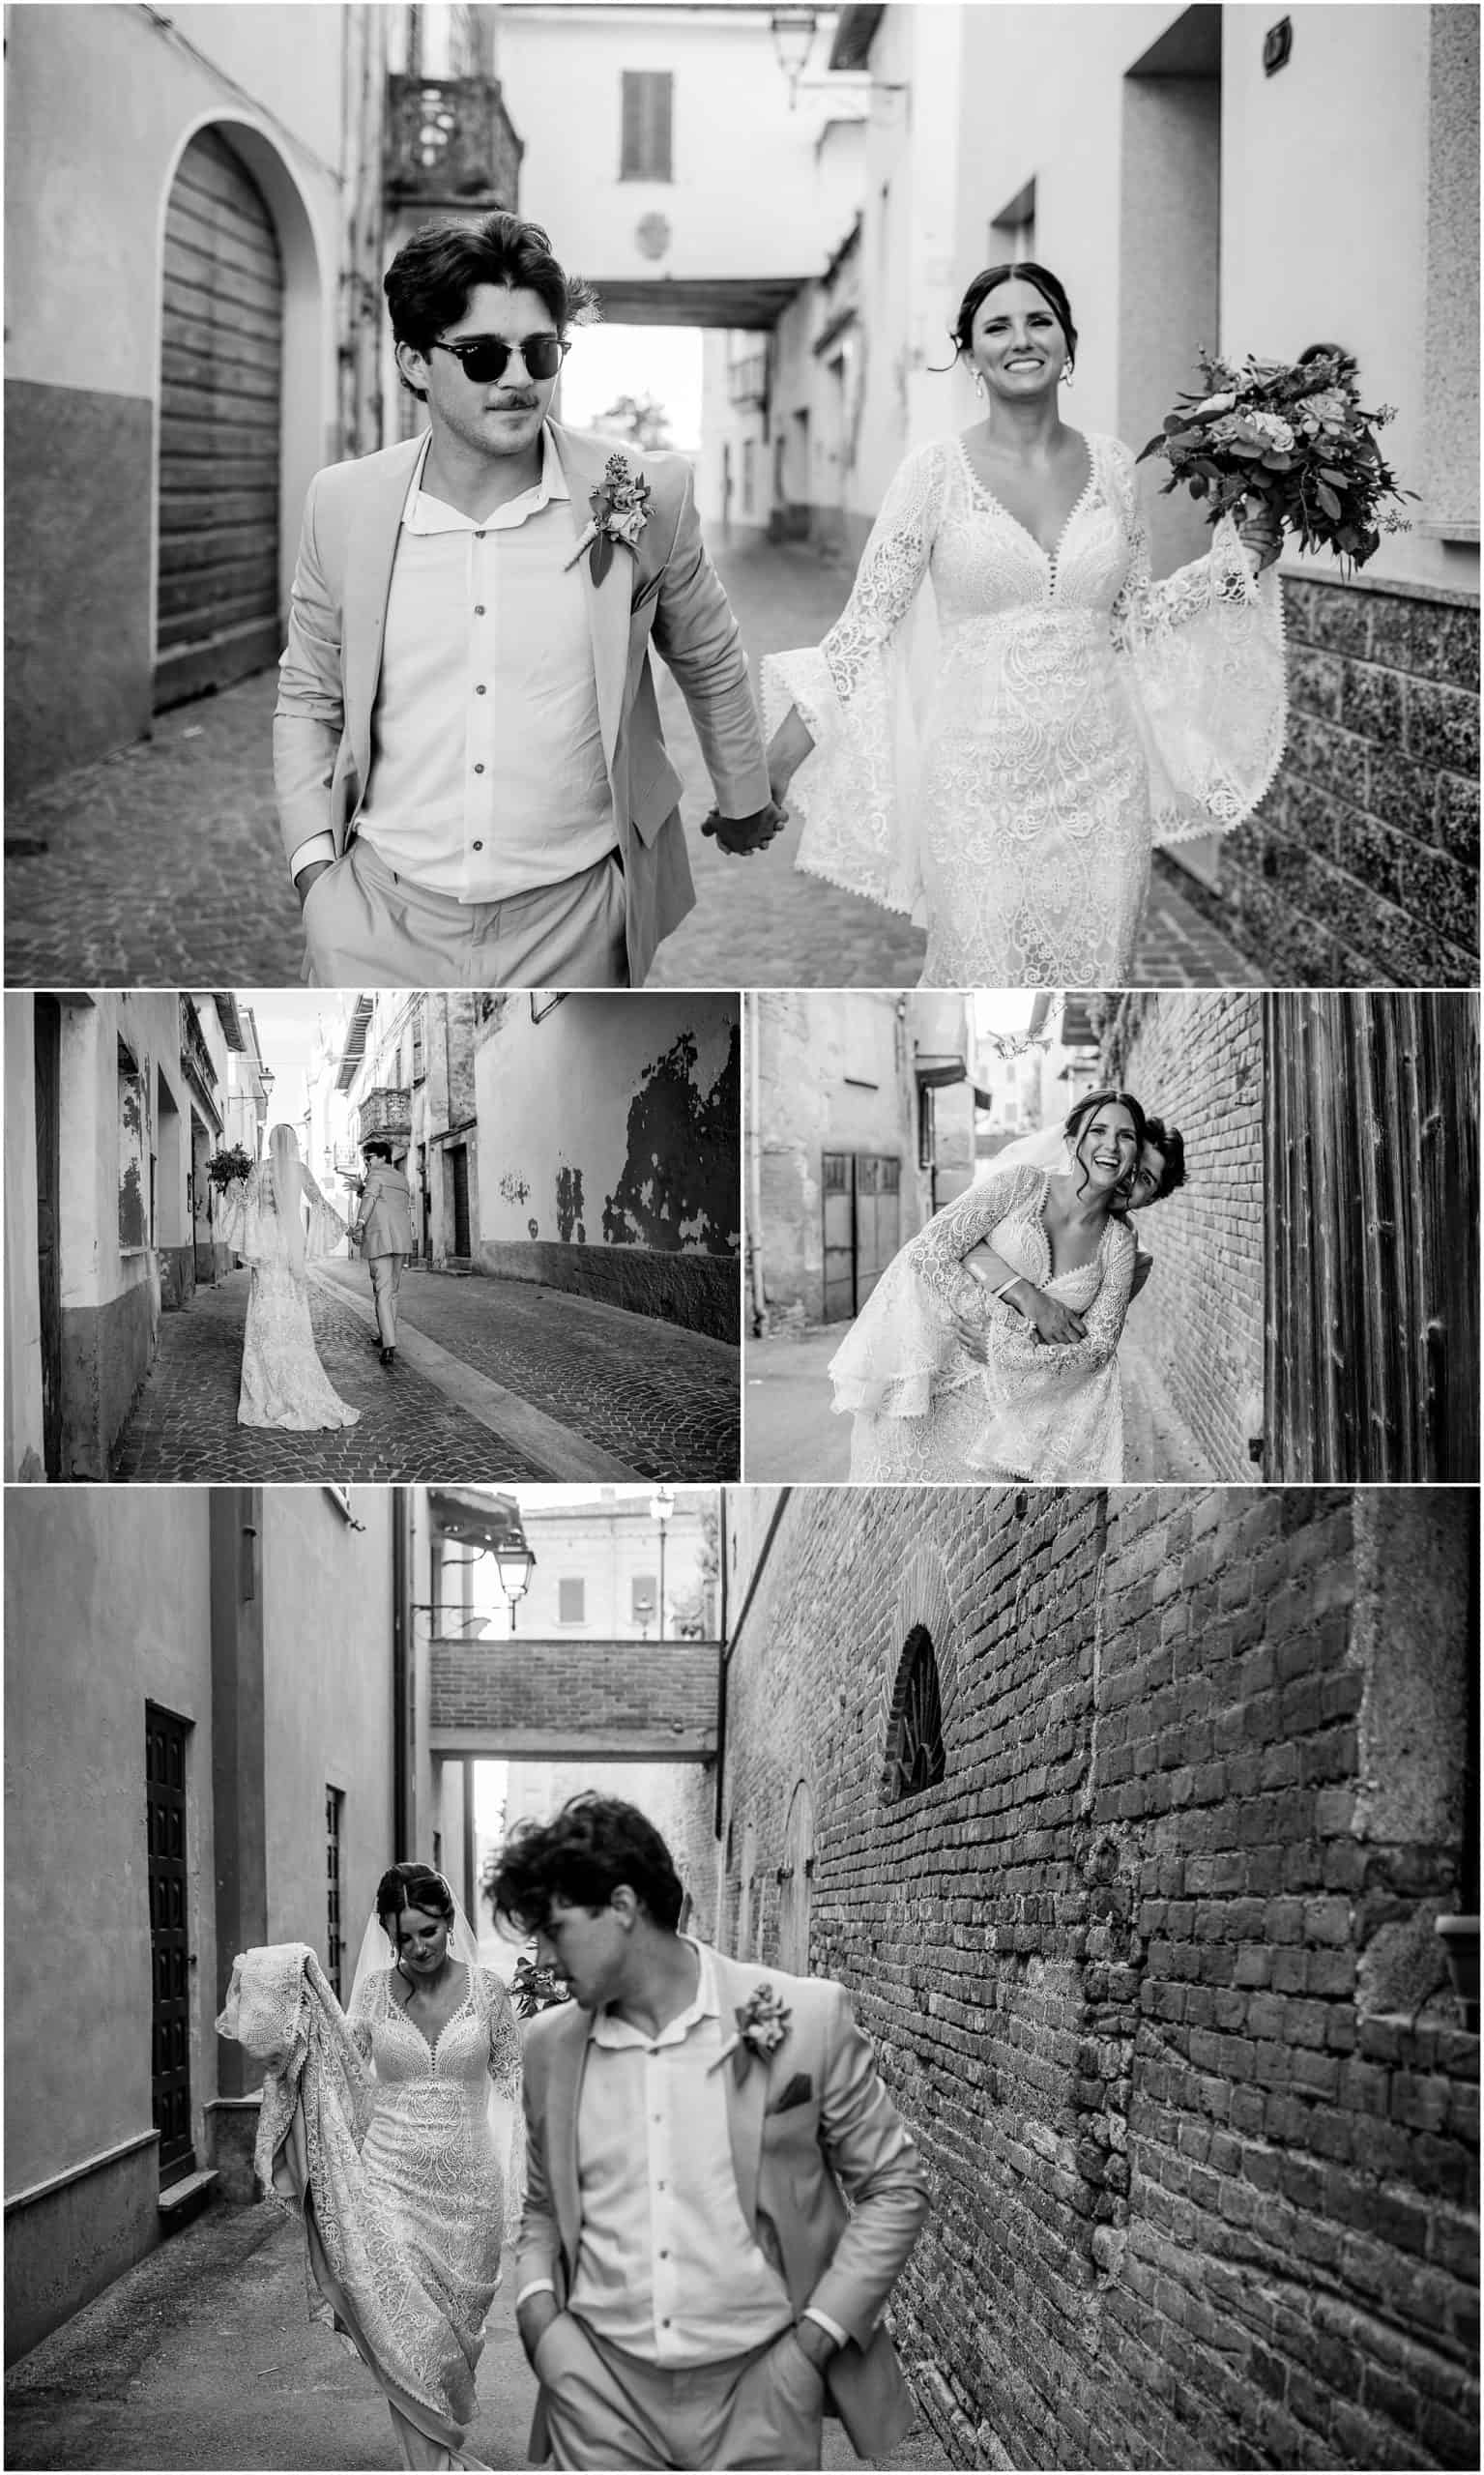 Bride and groom walking down the streets of an ancient village in Piedmont, Italy.